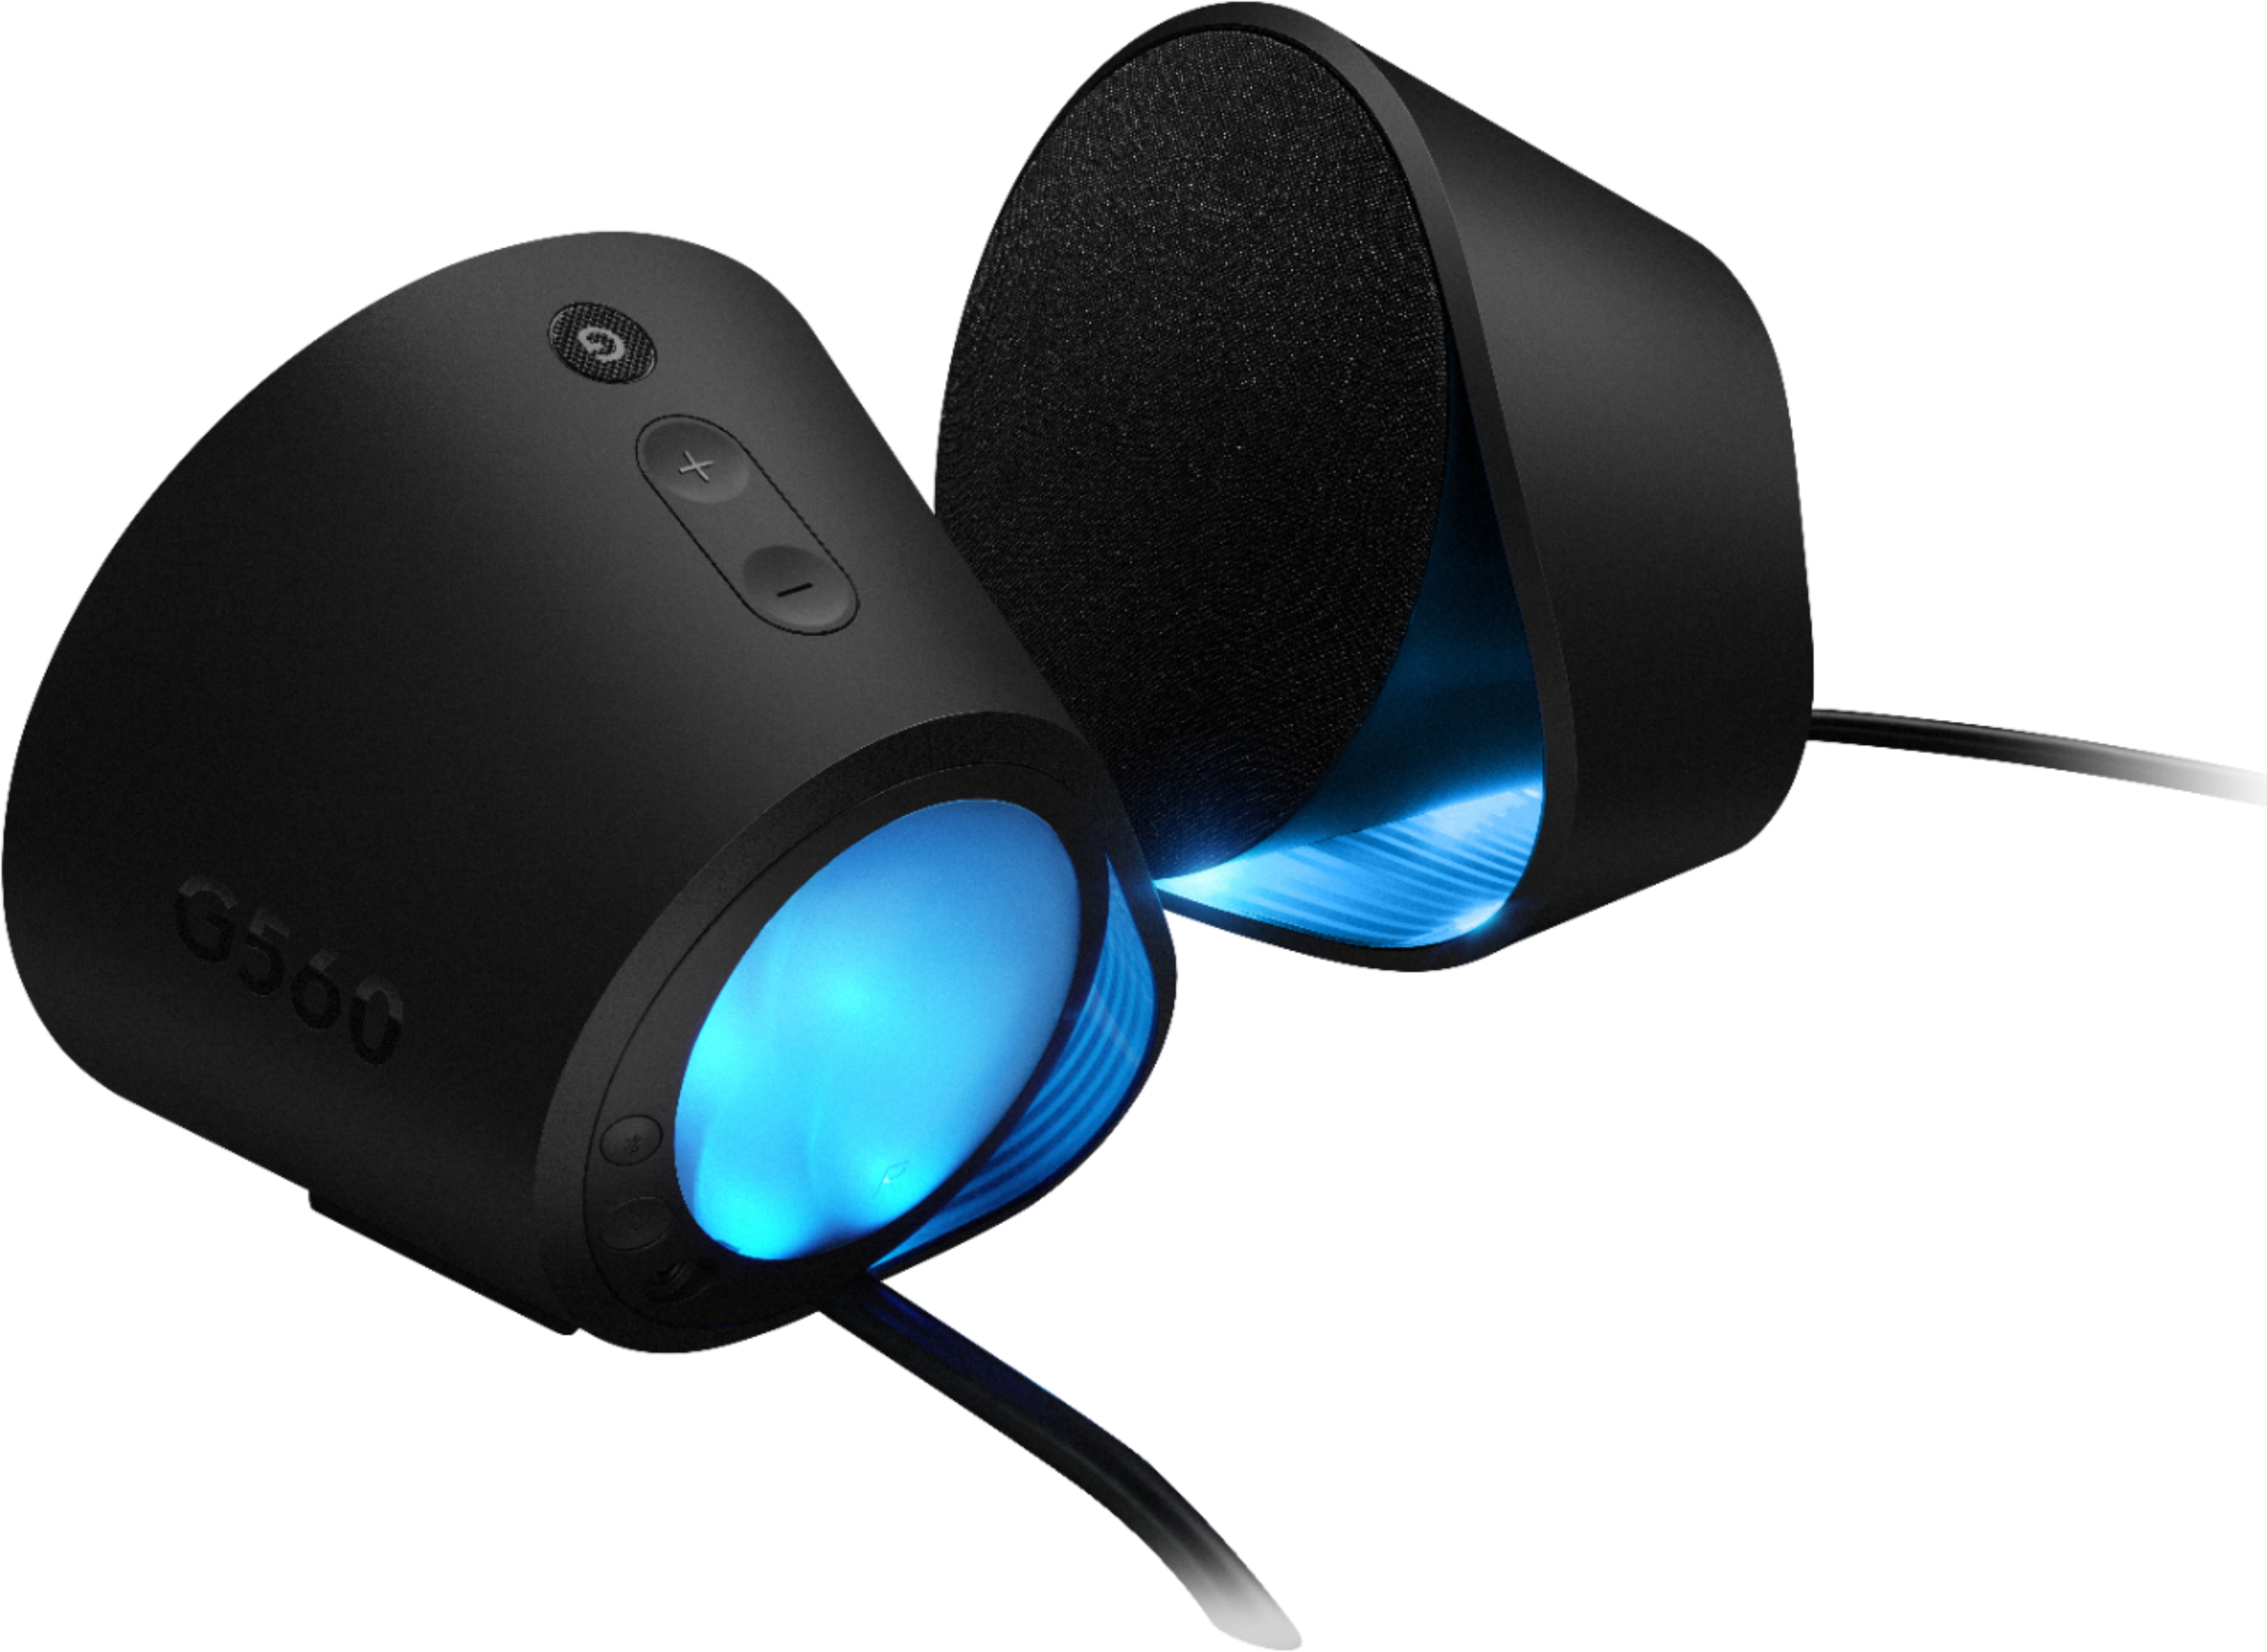 Logitech G560 LIGHTSYNC PC Gaming Speakers with Game Driven RGB Lighting